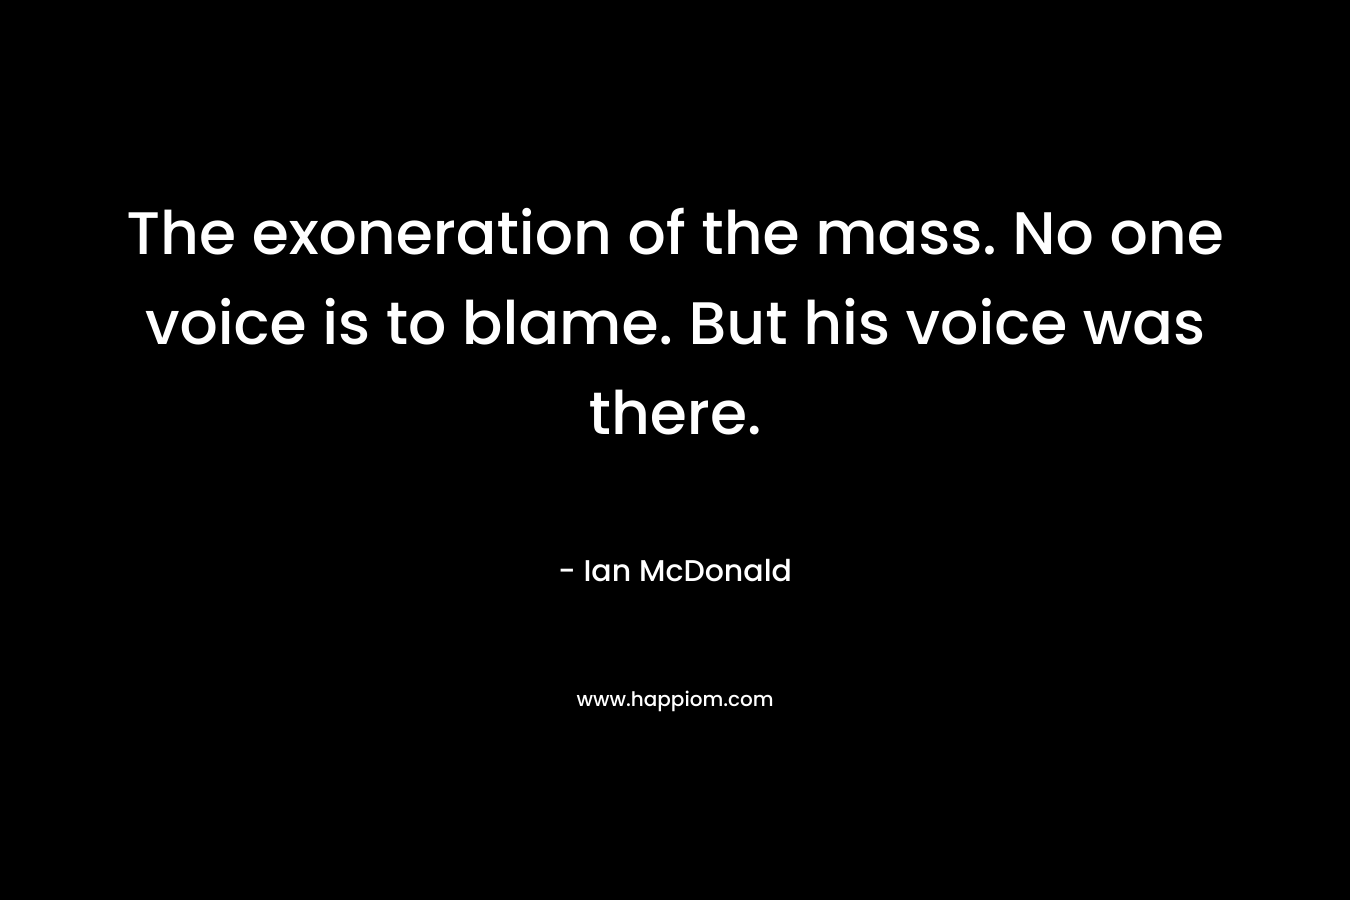 The exoneration of the mass. No one voice is to blame. But his voice was there. – Ian McDonald